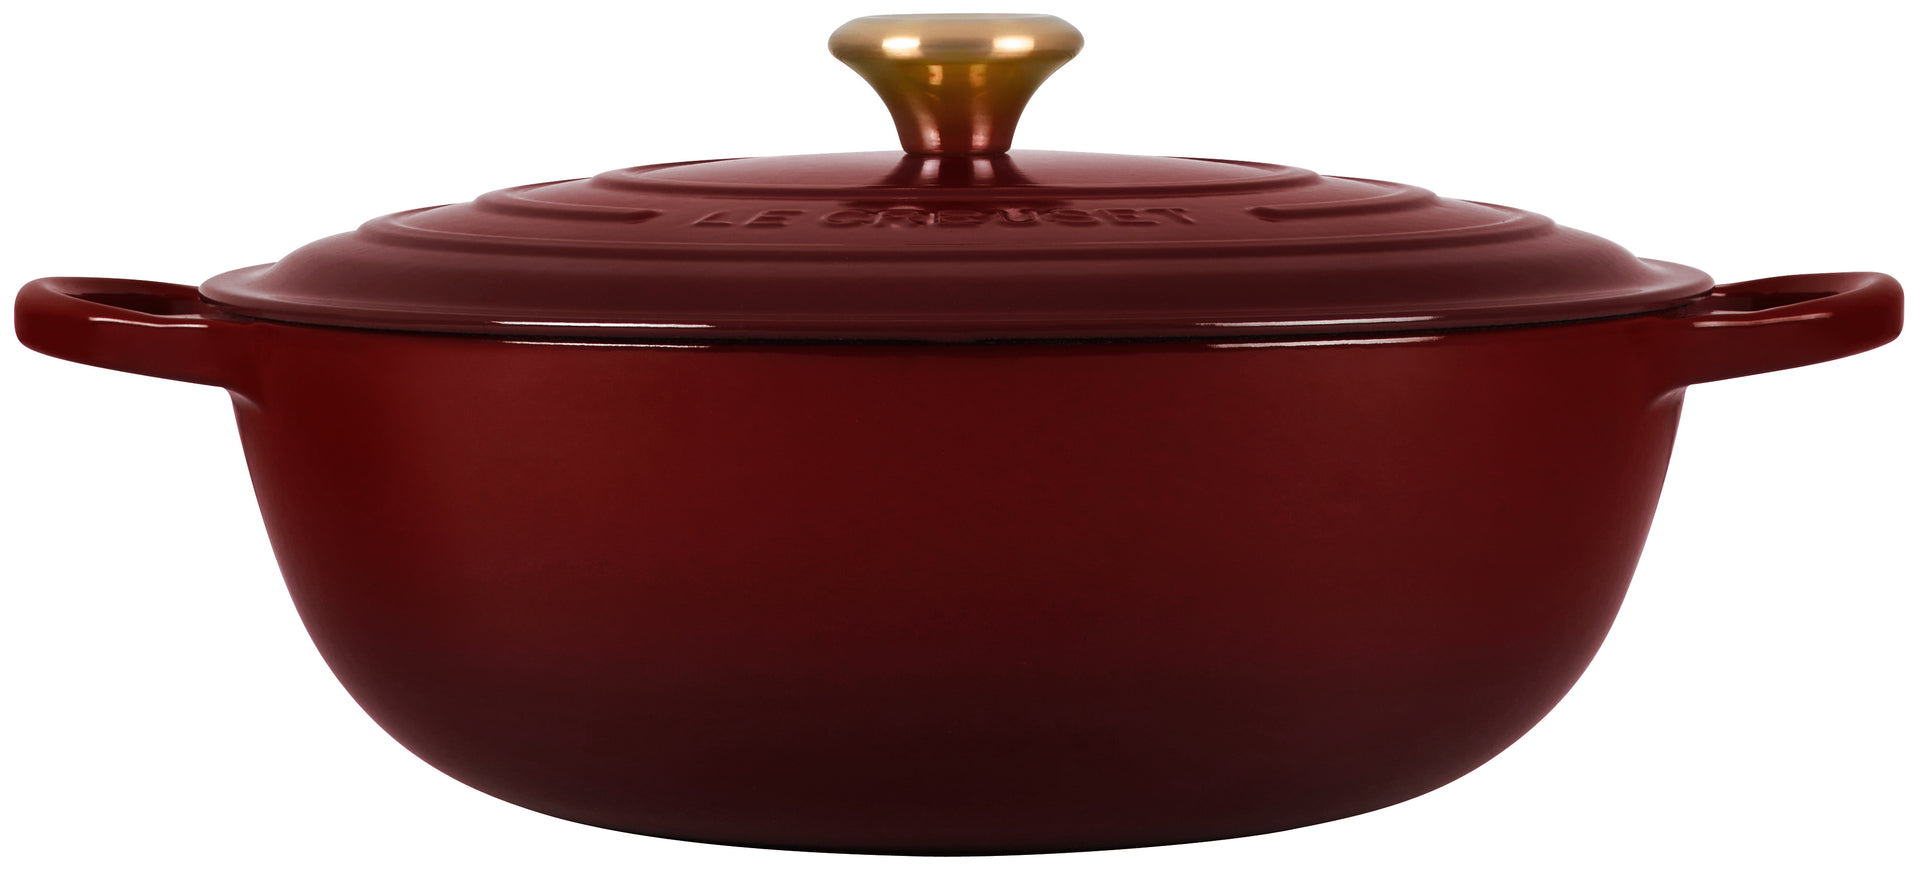 Le Creuset Cast Iron 7.5-qt Classic Chef's Oven with Glass Lid on